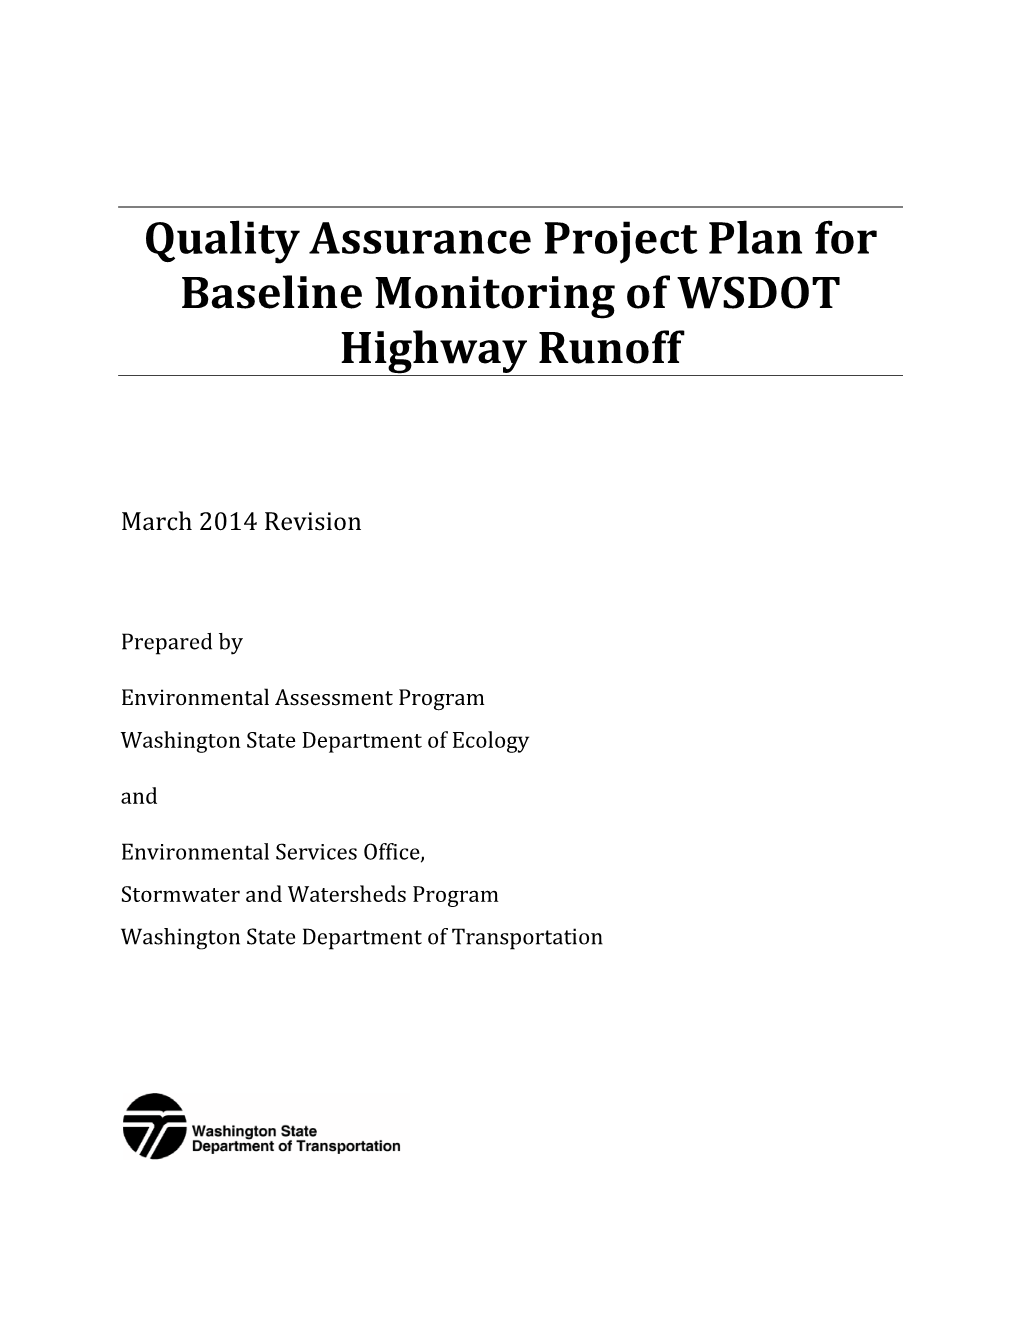 QAPP for Baseline Monitoring of WSDOT Highway Runoff Page I